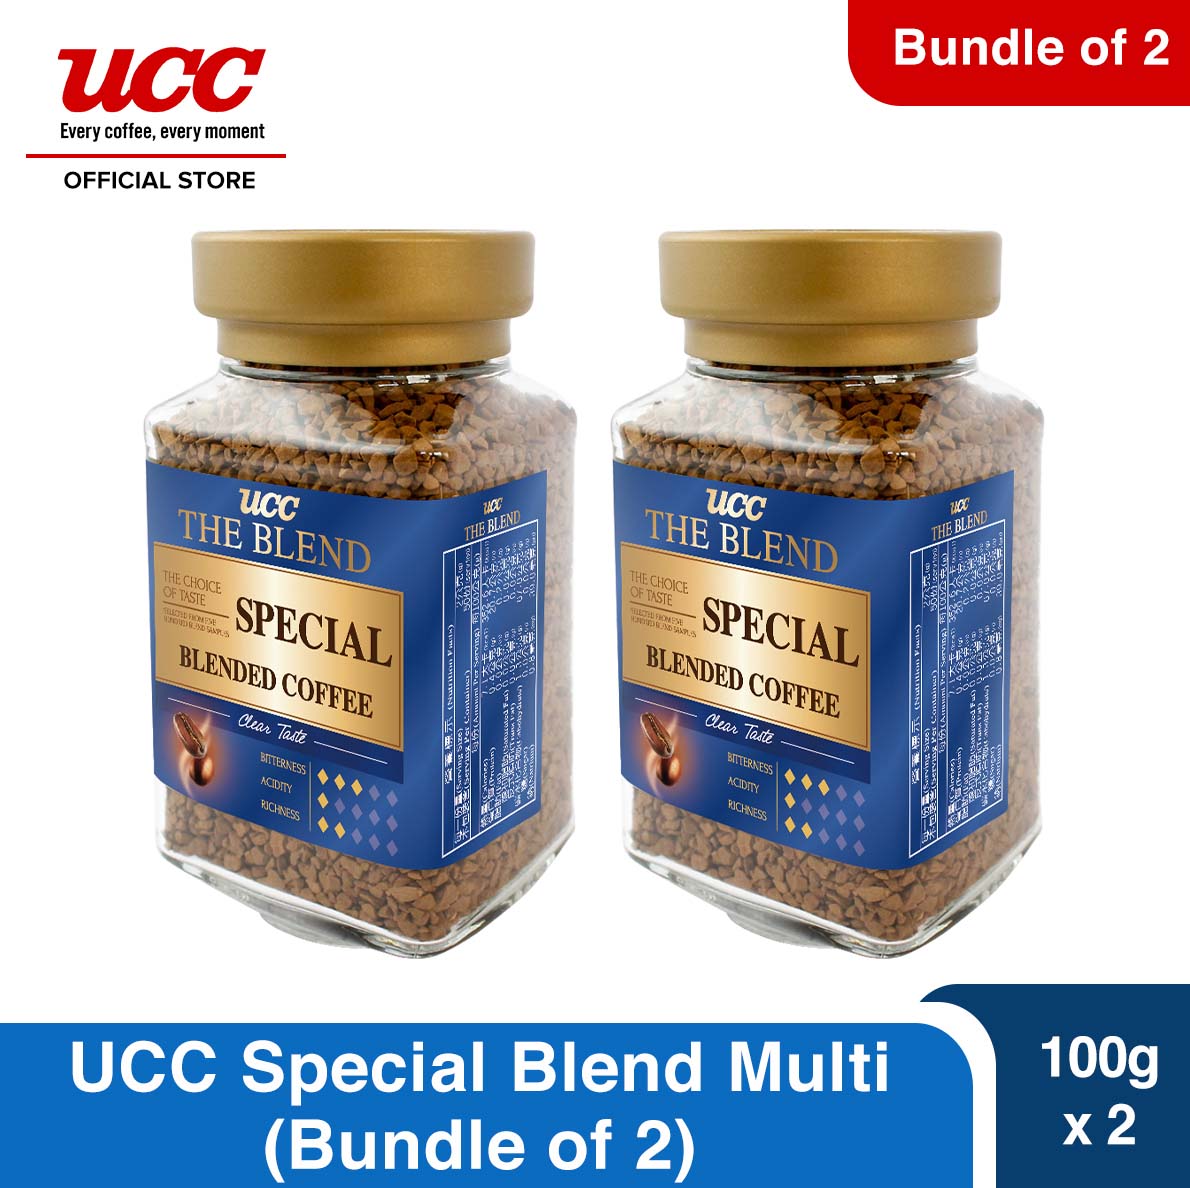 UCC Special Blend Multi (Bundle of 2) 100g x 2